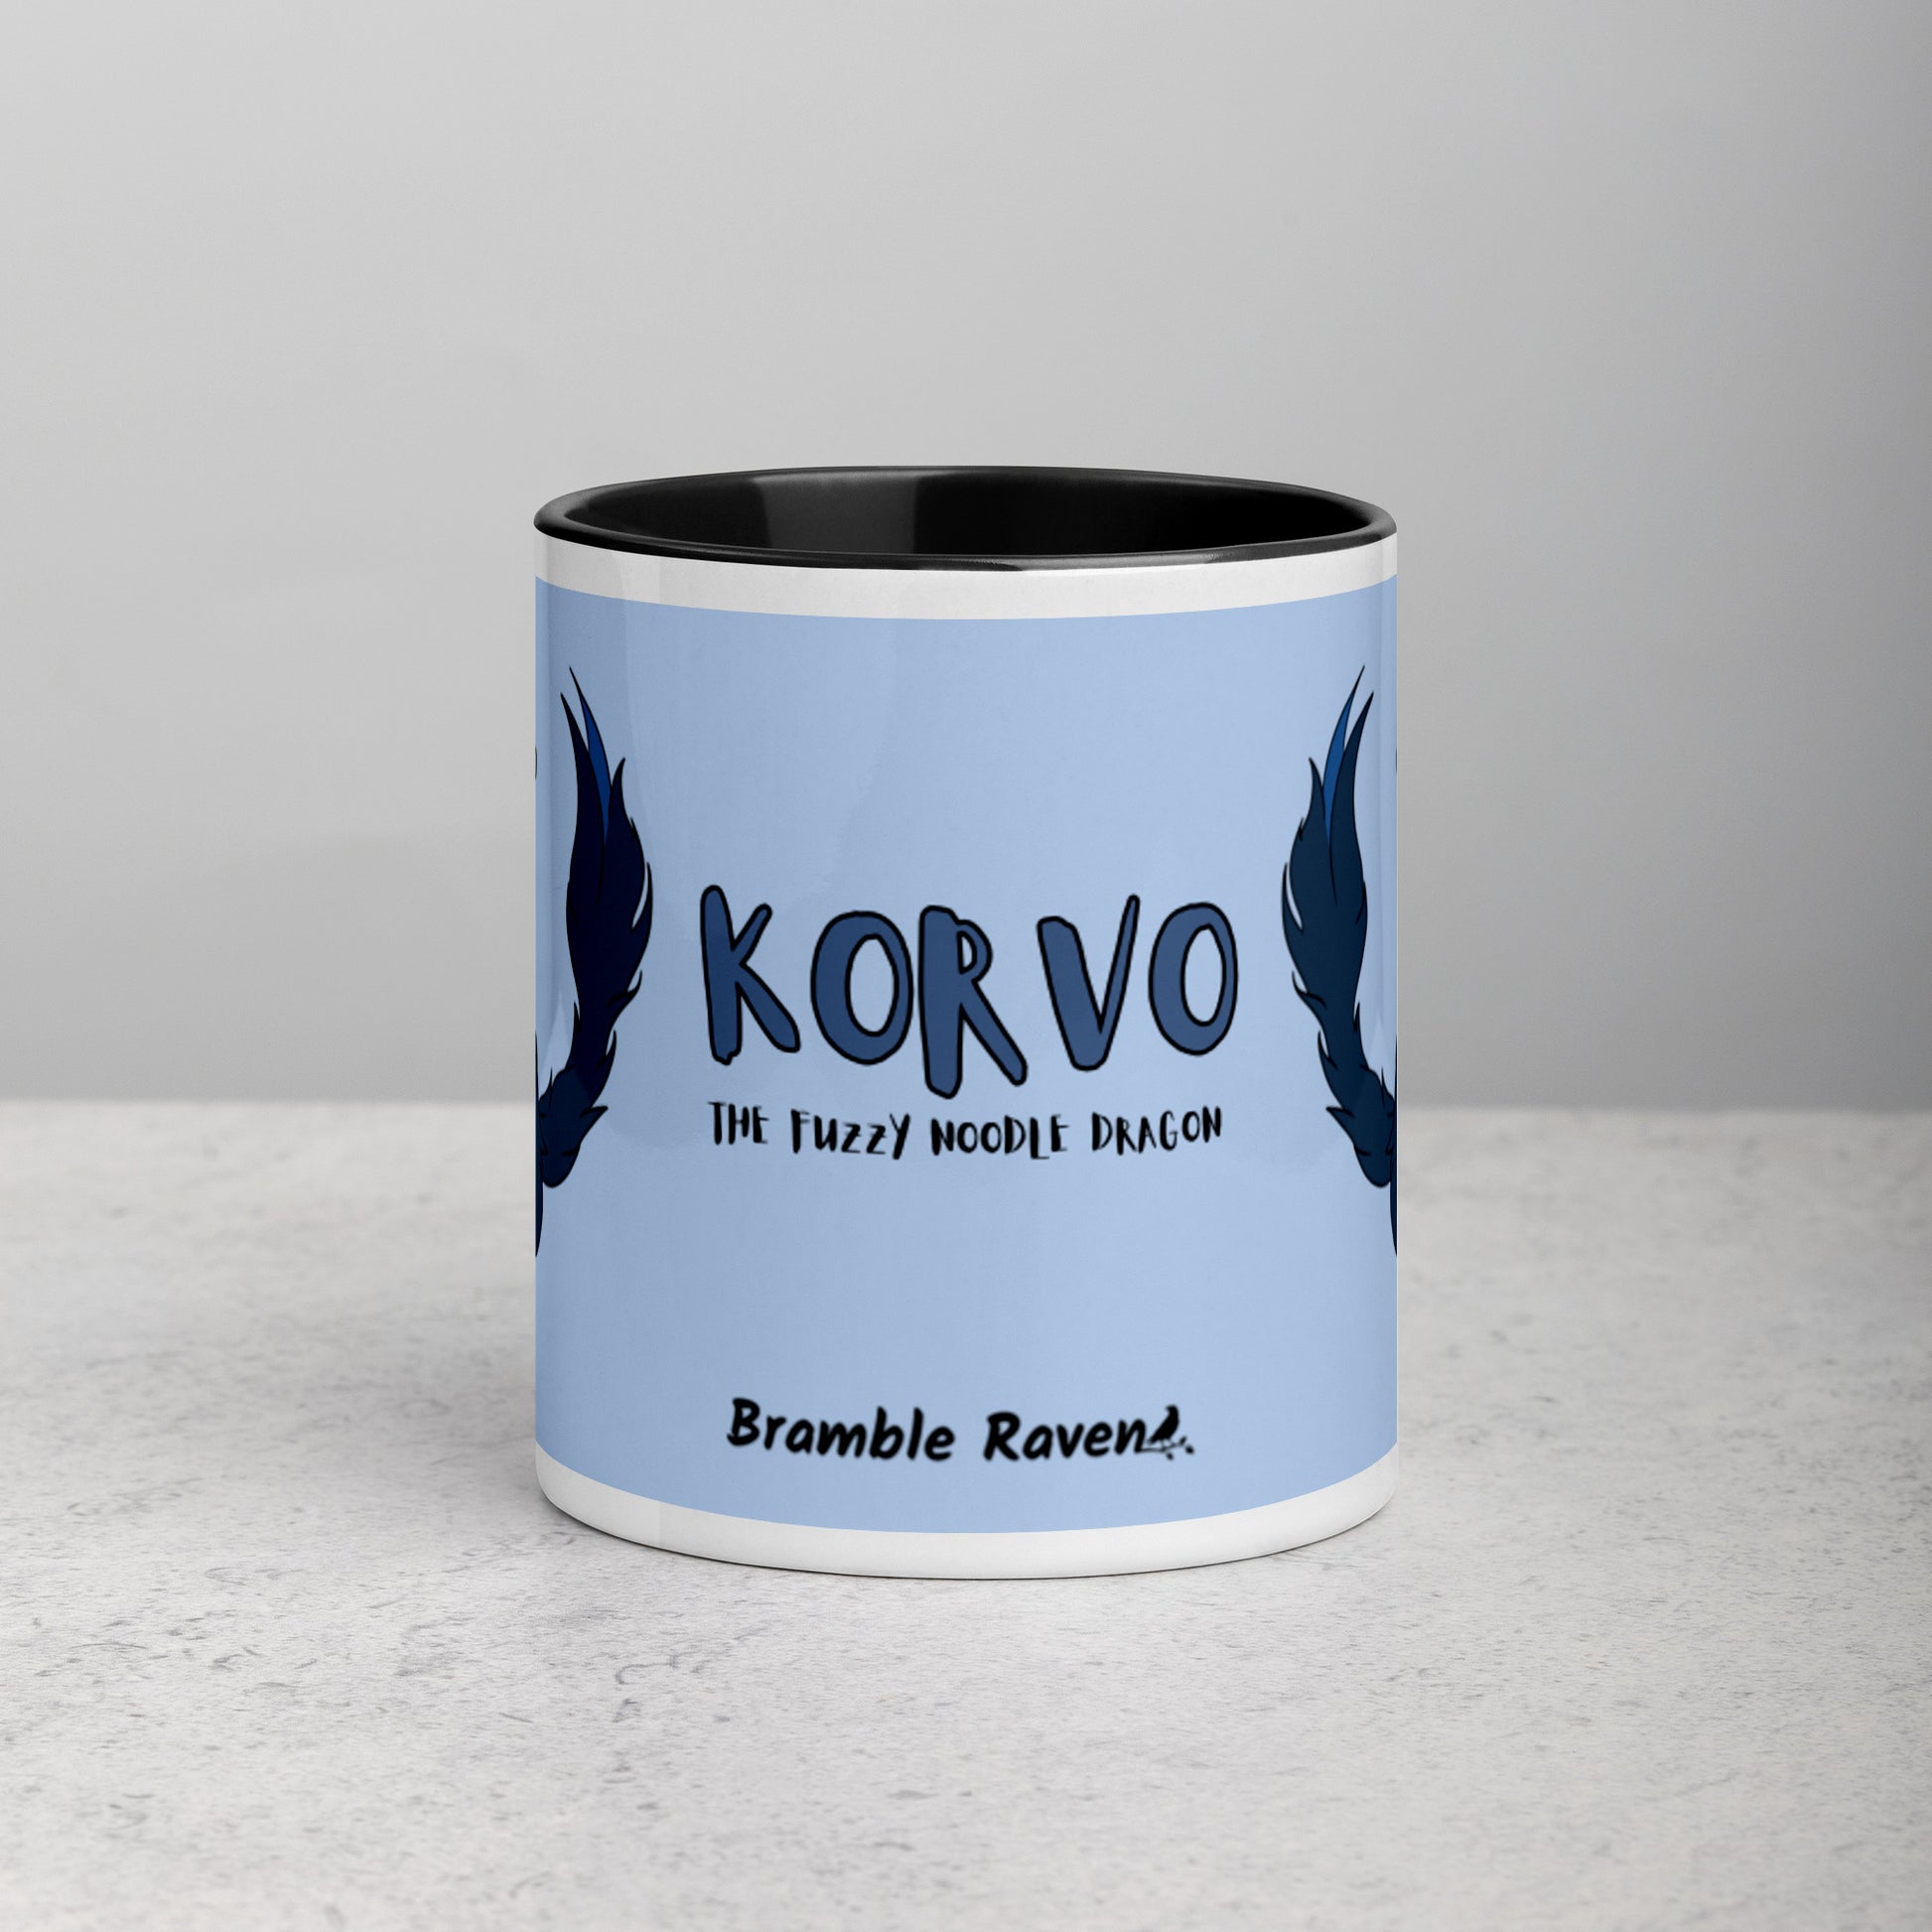 11 ounce ceramic mug featuring a double-sided image of angry Korvo the Fuzzy Noodle dragon against a light blue background.  Black inside and handle. Sitting on tabletop. Image shows front of mug with Korvo the Fuzzy Noodle Dragon text and Bramble Raven logo.